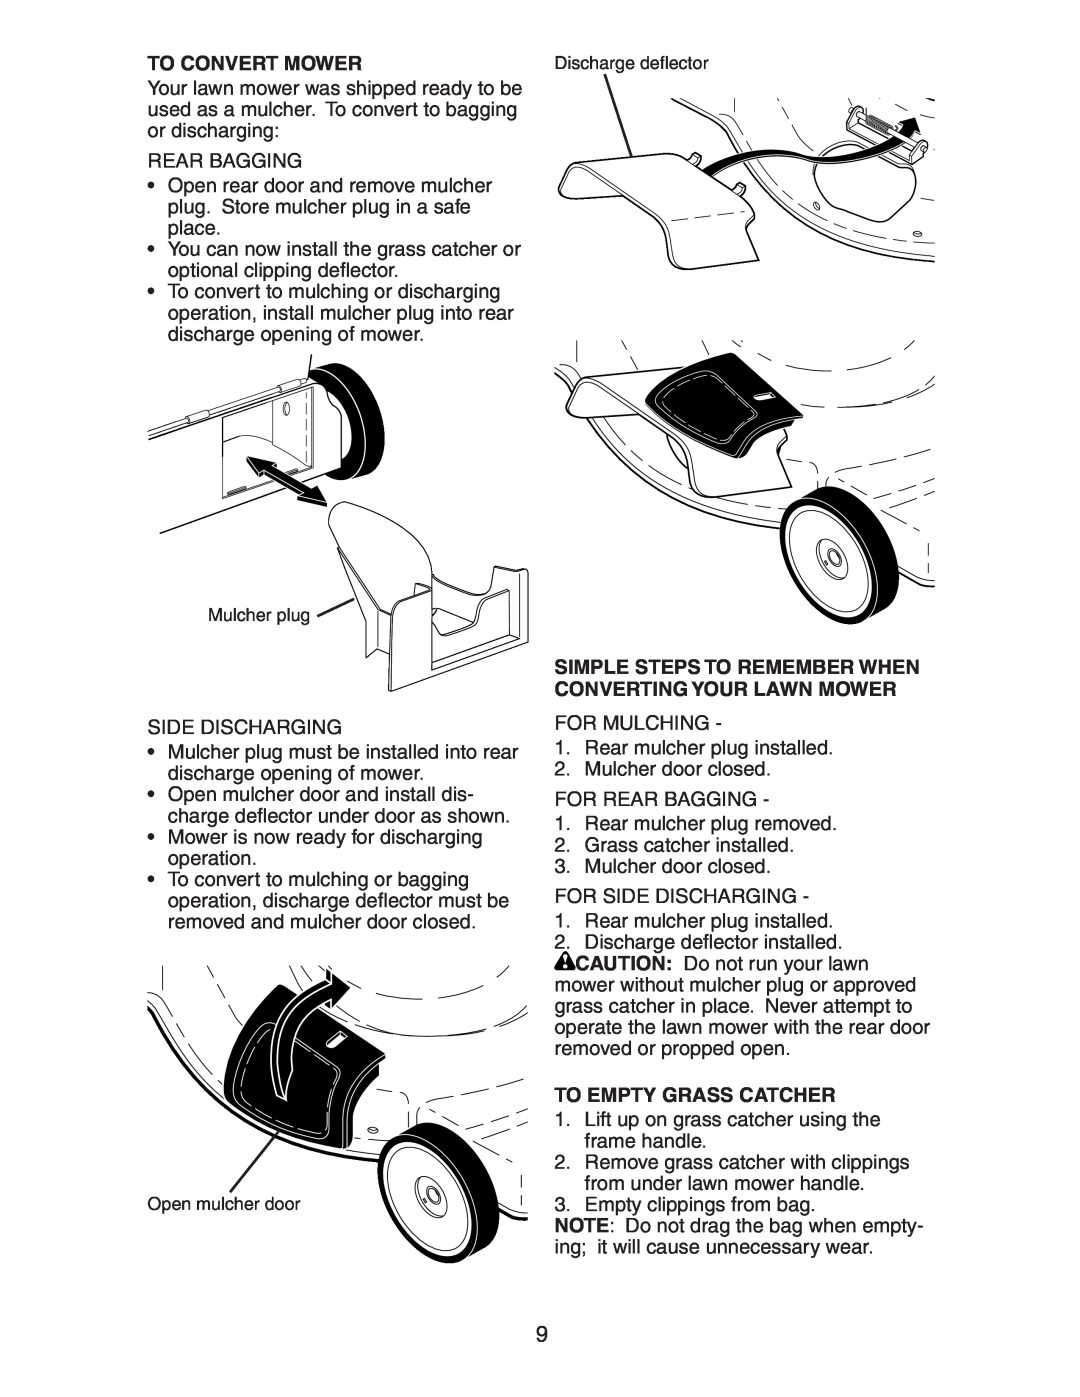 Husqvarna 917.37583 To Convert Mower, Simple Steps To Remember When Converting Your Lawn Mower, To Empty Grass Catcher 